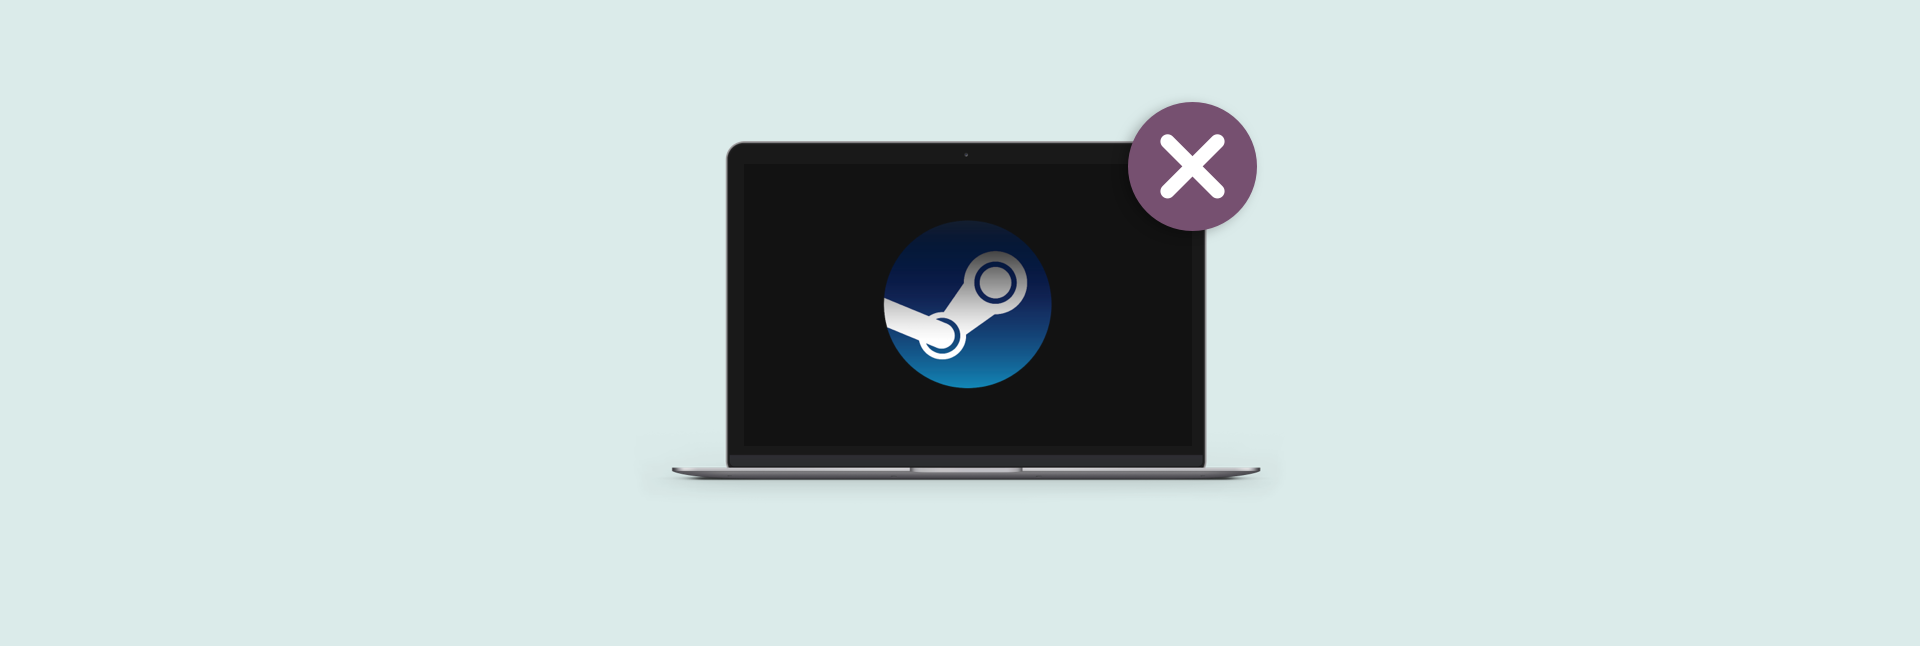 open setting for steam on mac